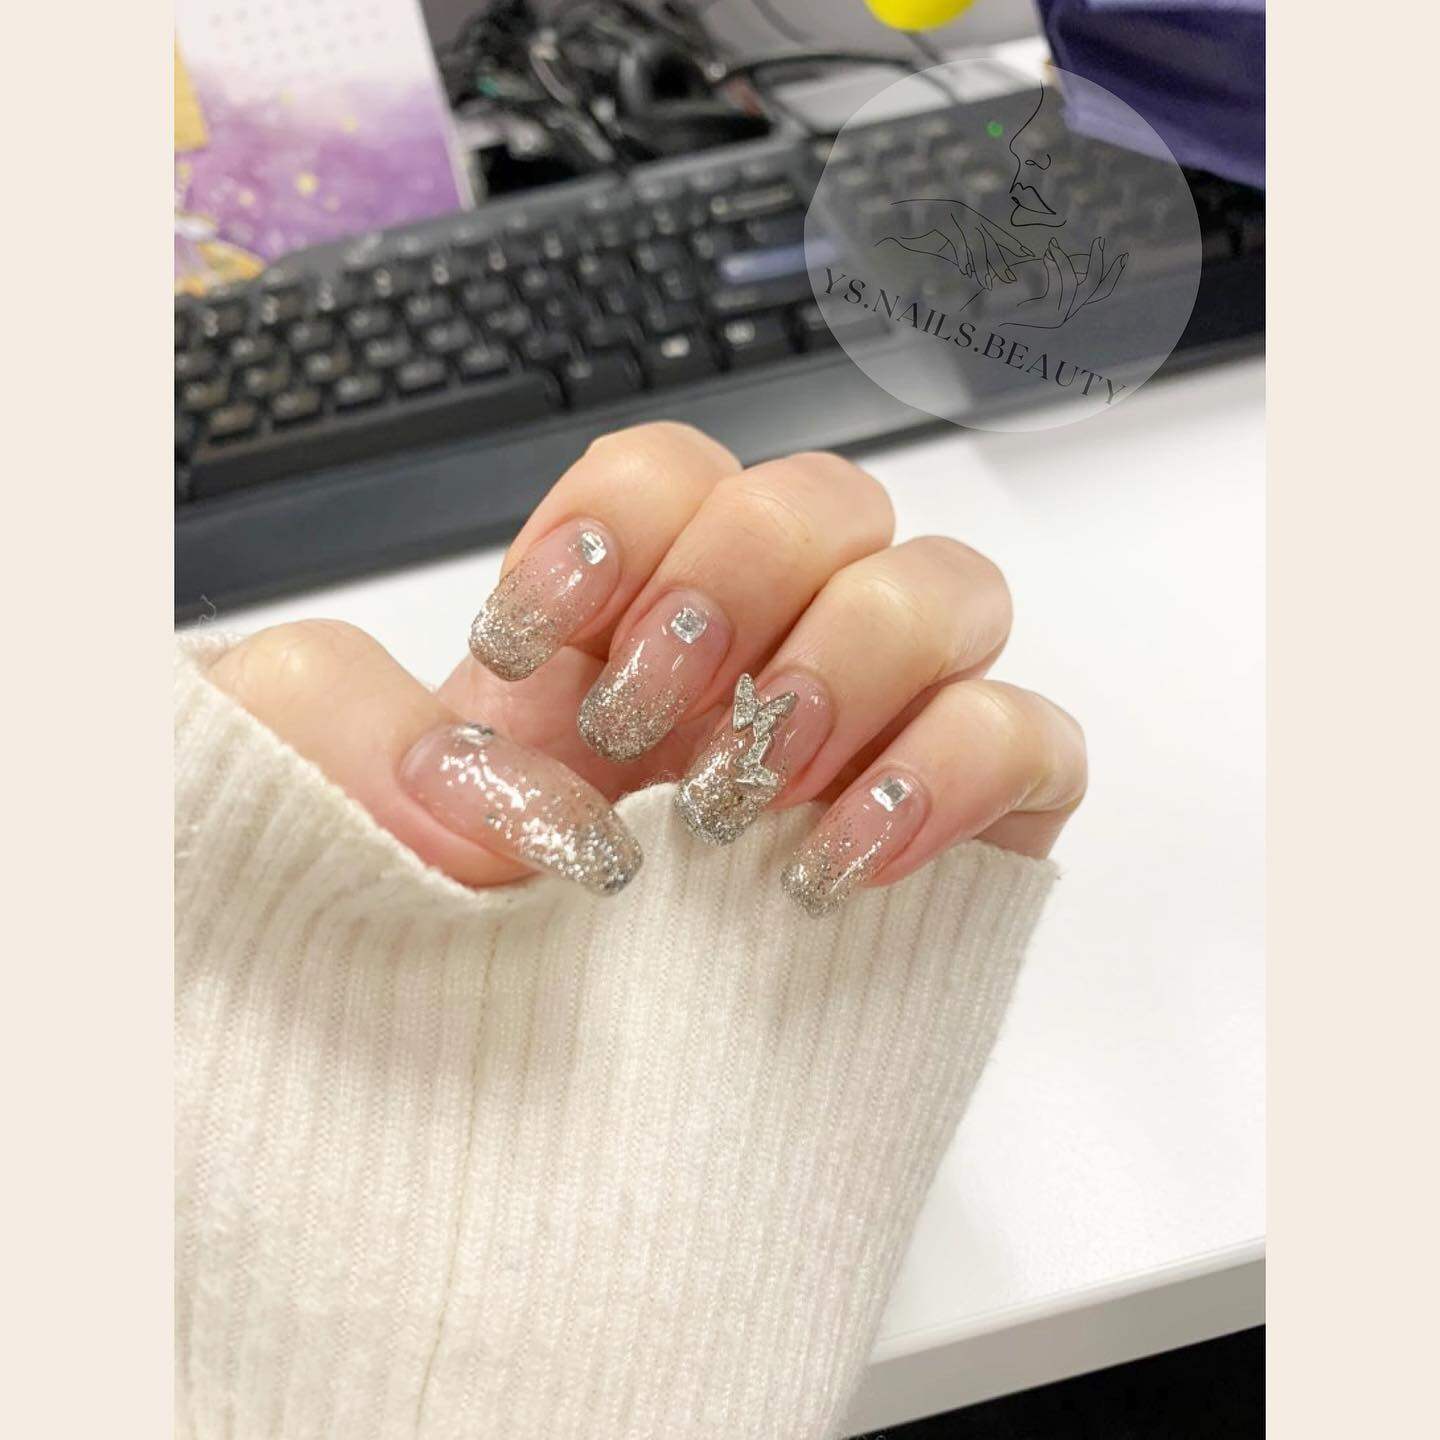 Gel甲 ys.nails.beauty